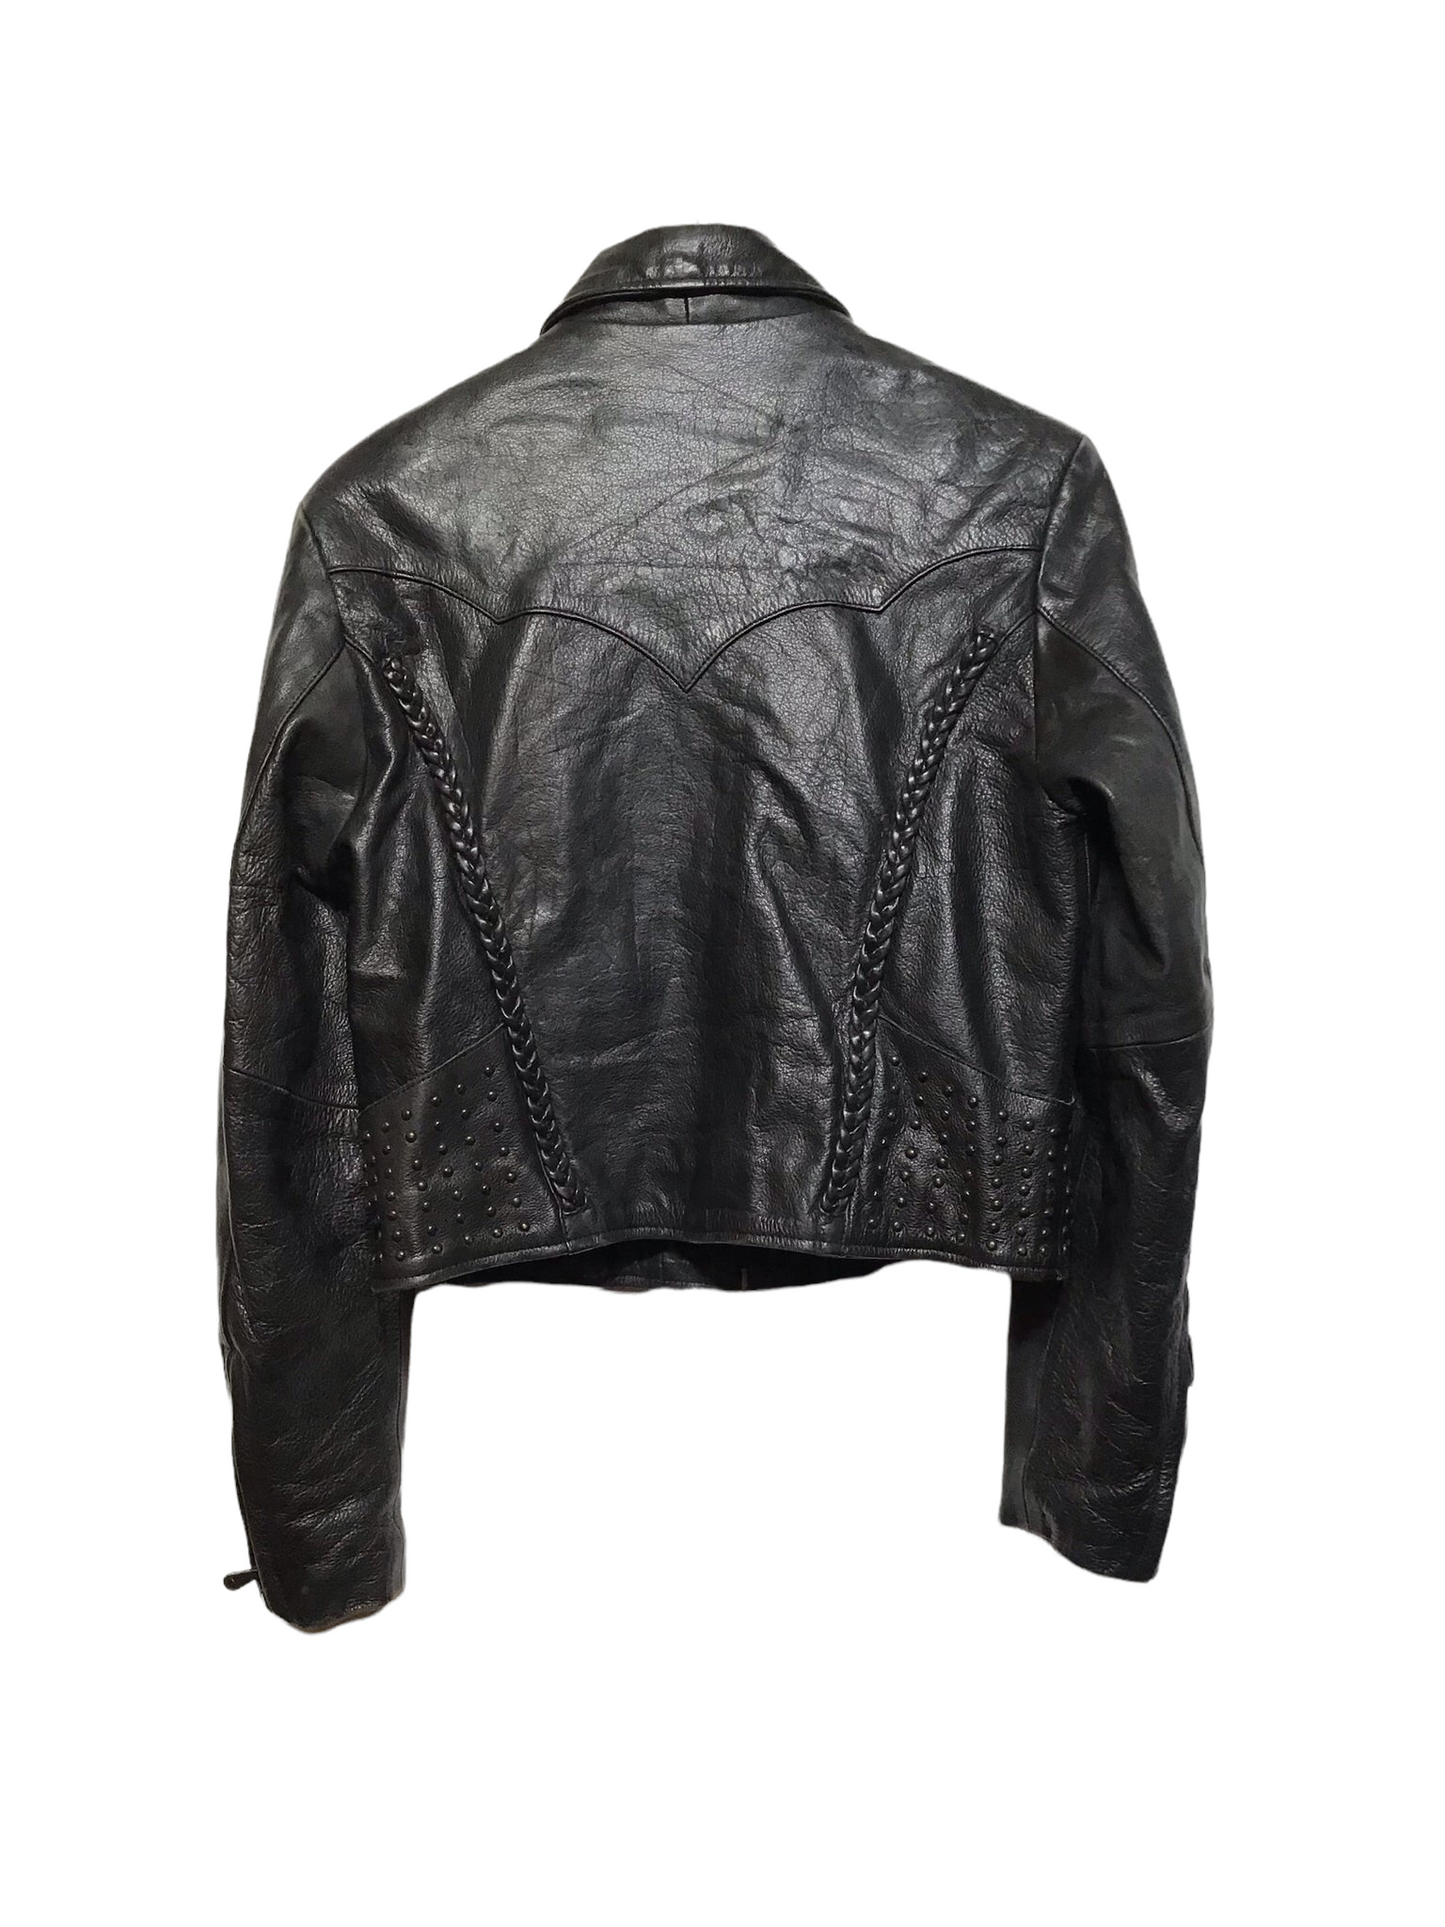 Ladies Cropped Leather Jacket (Size S)